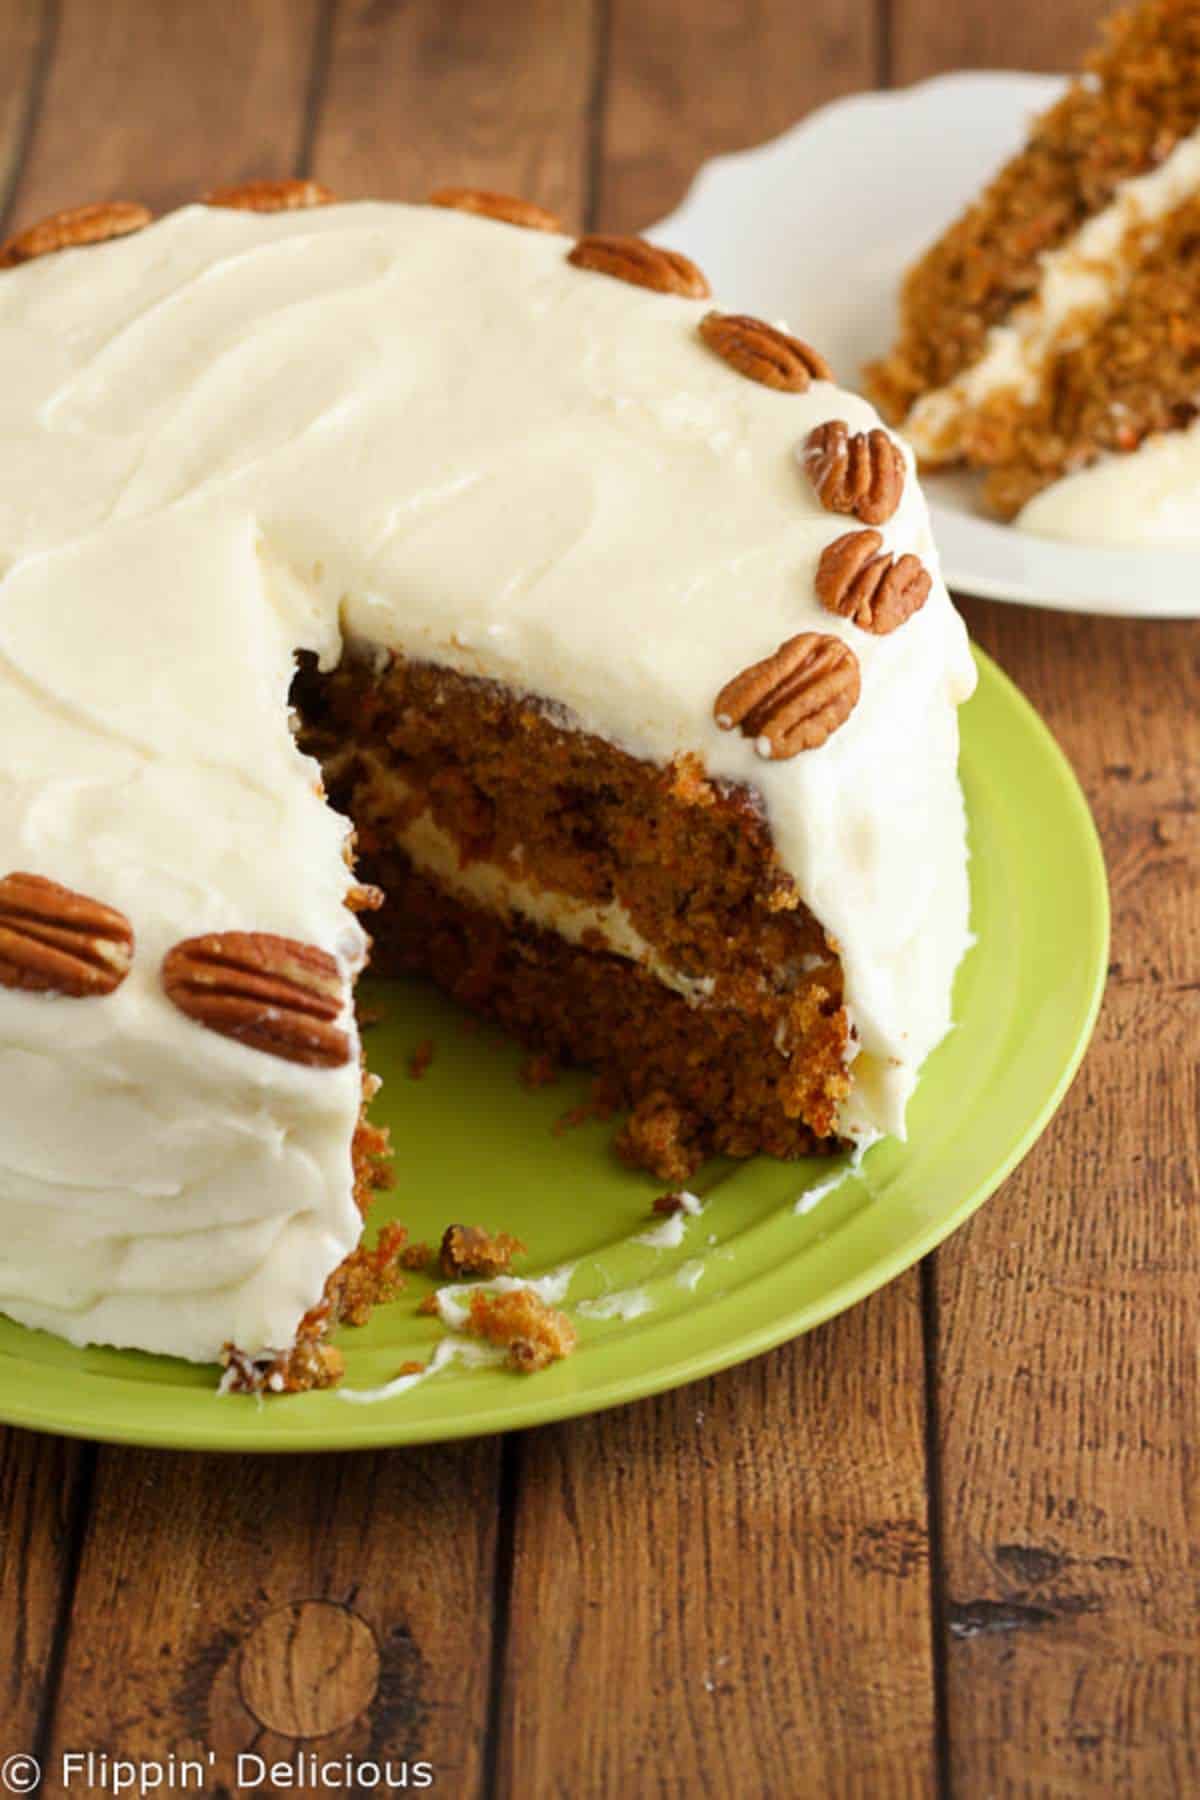 Scrumptious Carrot Cake with Buttercream Frosting and Whipped Cream on a green tray.